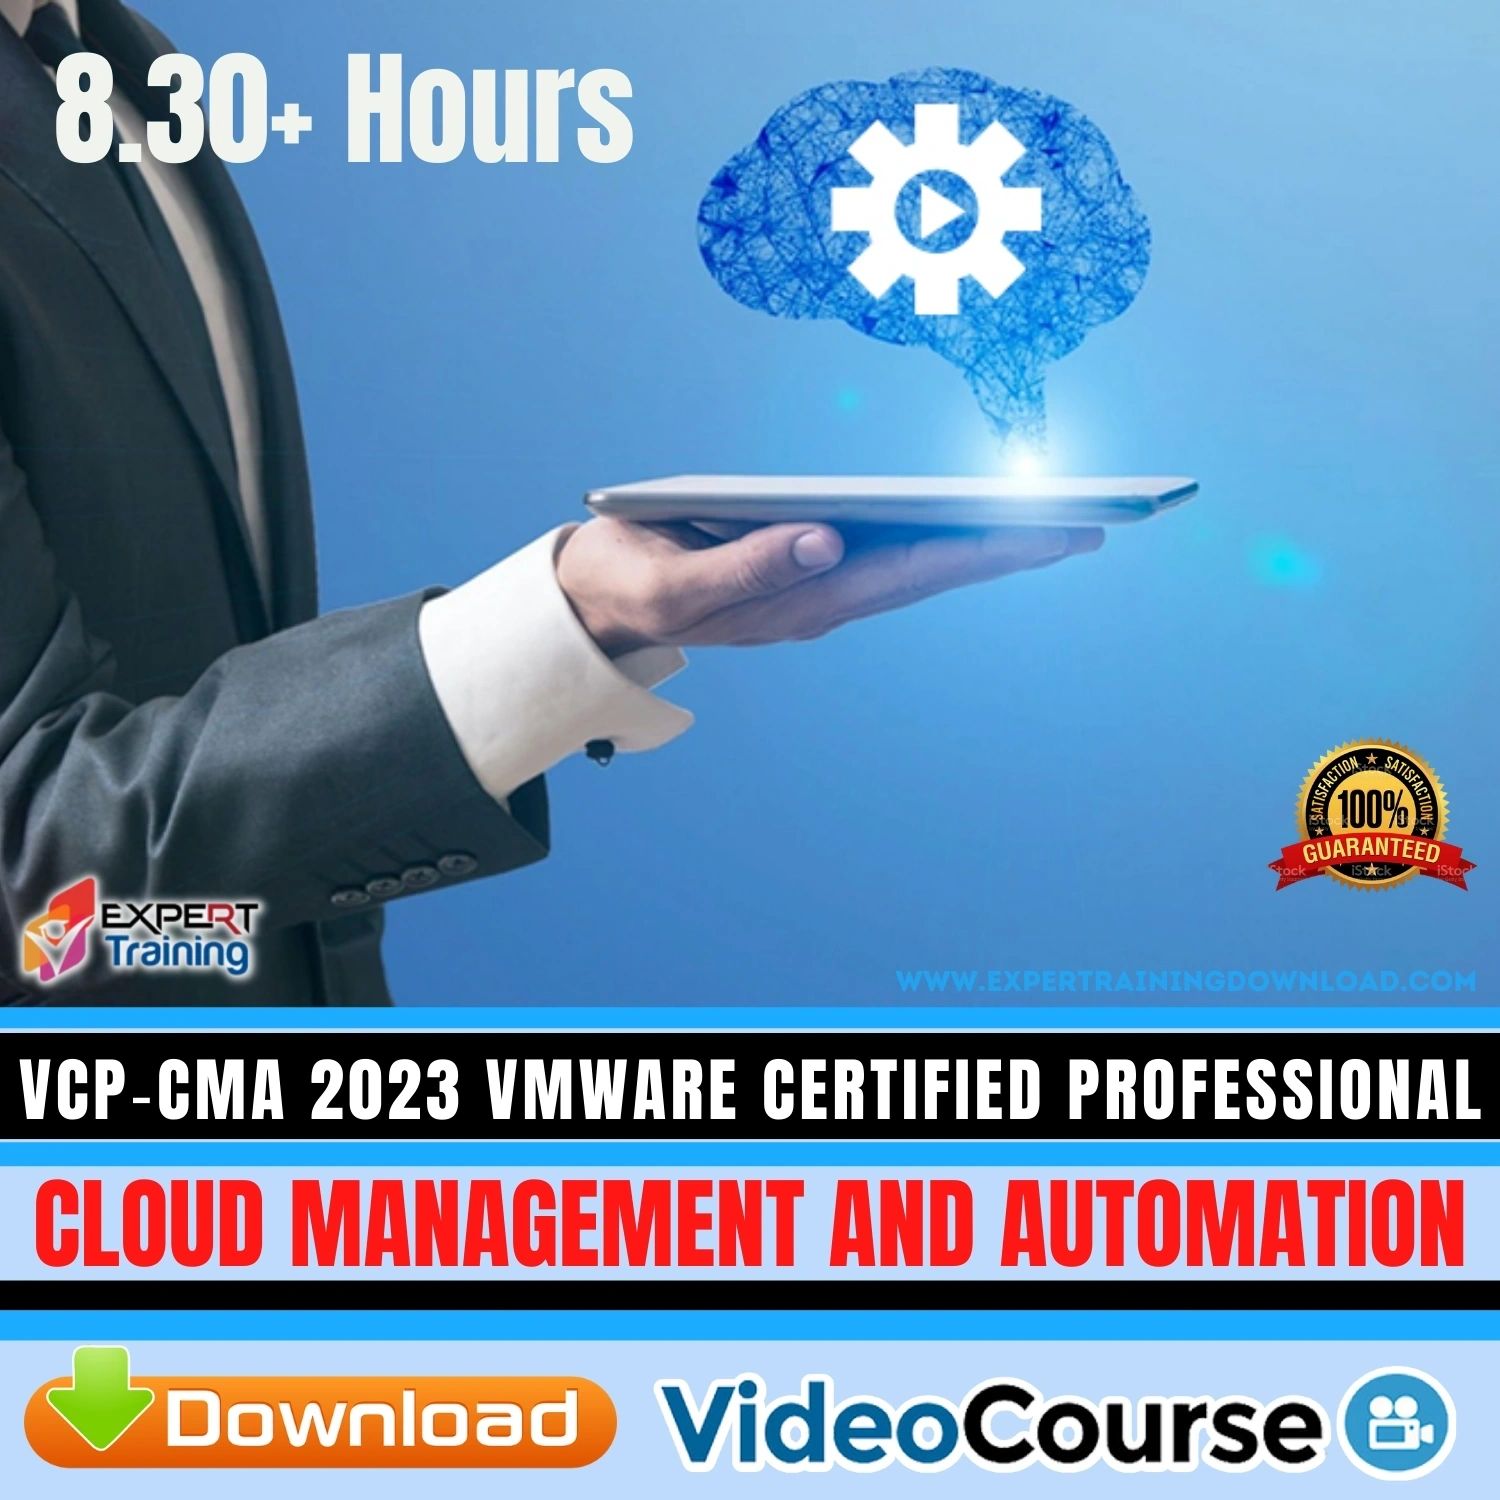 VCP-CMA 2023 VMware Certified Professional – Cloud Management and Automation